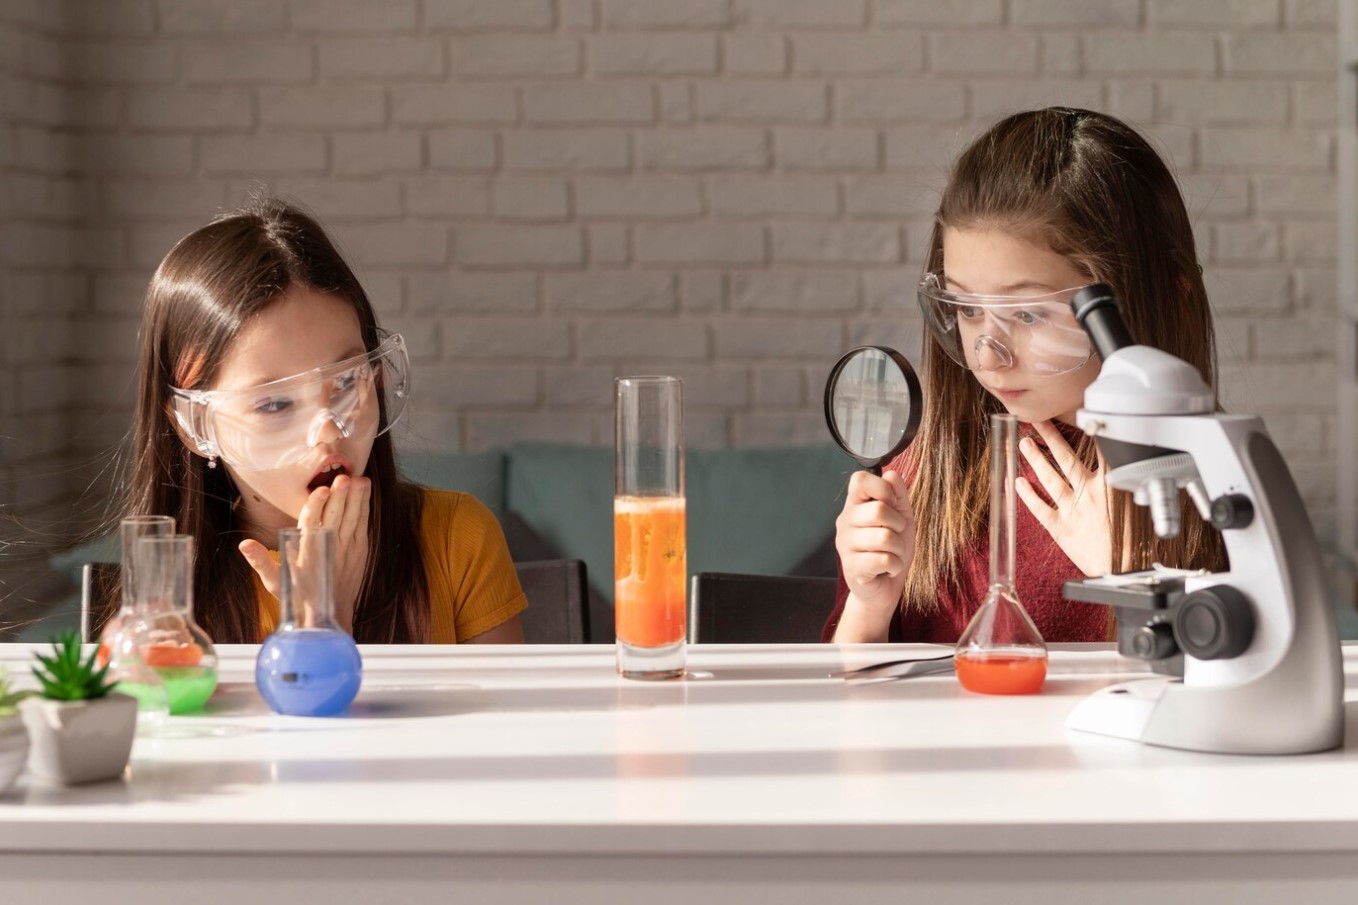 Discover 10 captivating science experiments for kids that can easily be conducted at home using basic materials. Engage young minds with these hands-on activities, fostering curiosity and exploration in the world of science.